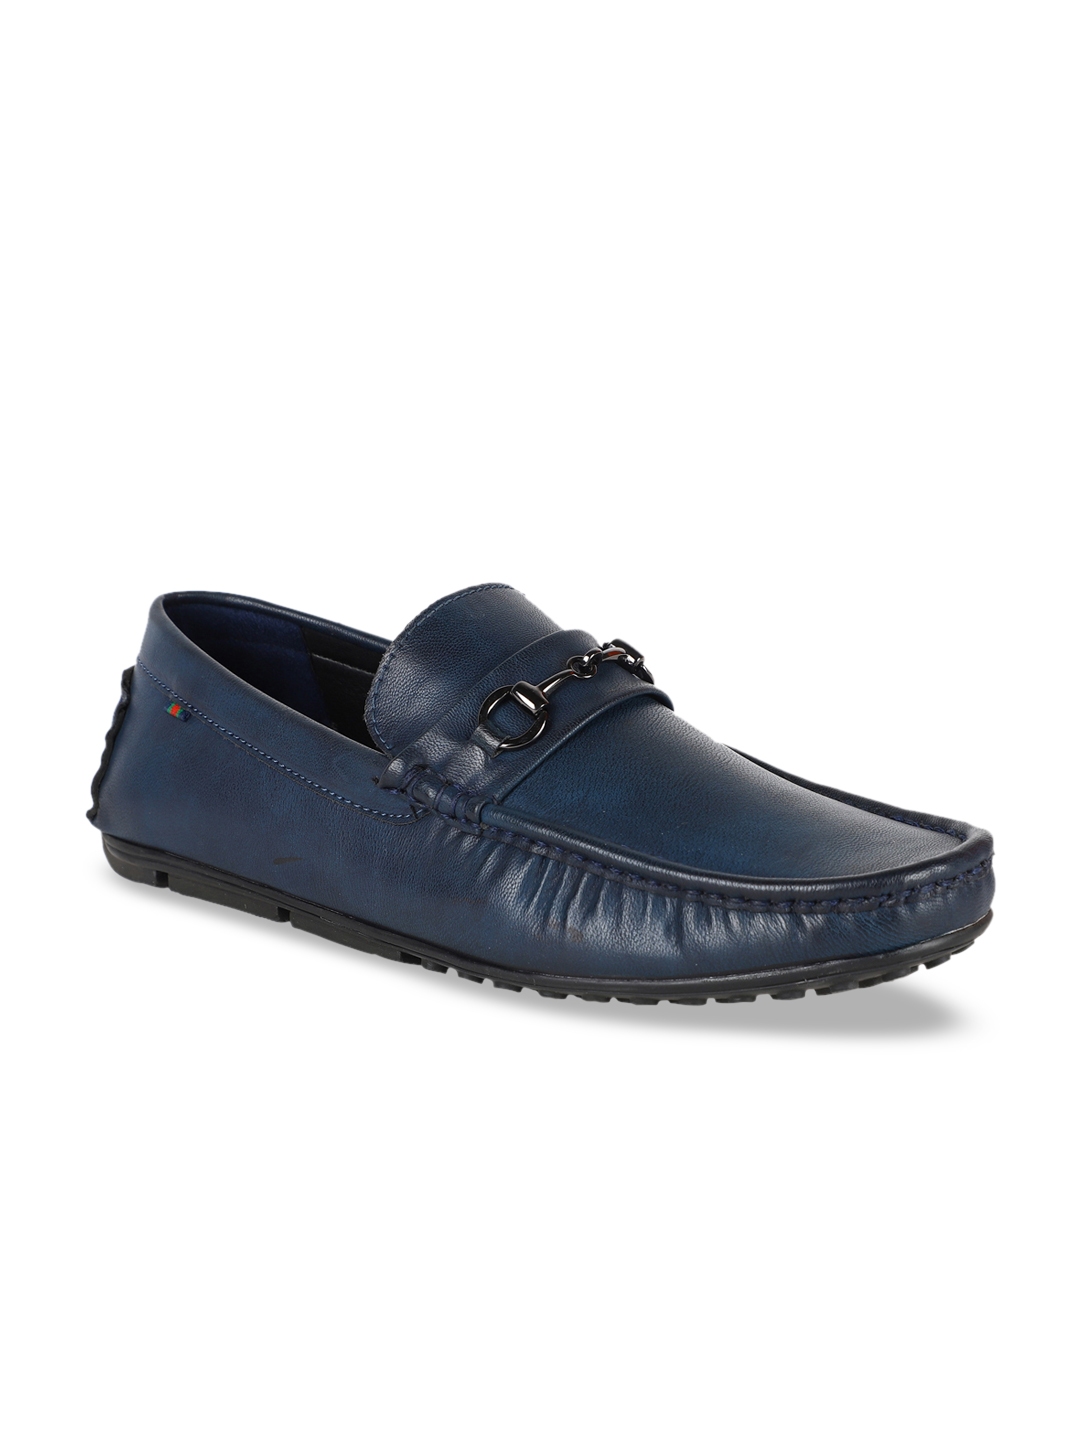 Buy Harvard Men Navy Blue Loafers - Casual Shoes for Men 10051559 | Myntra